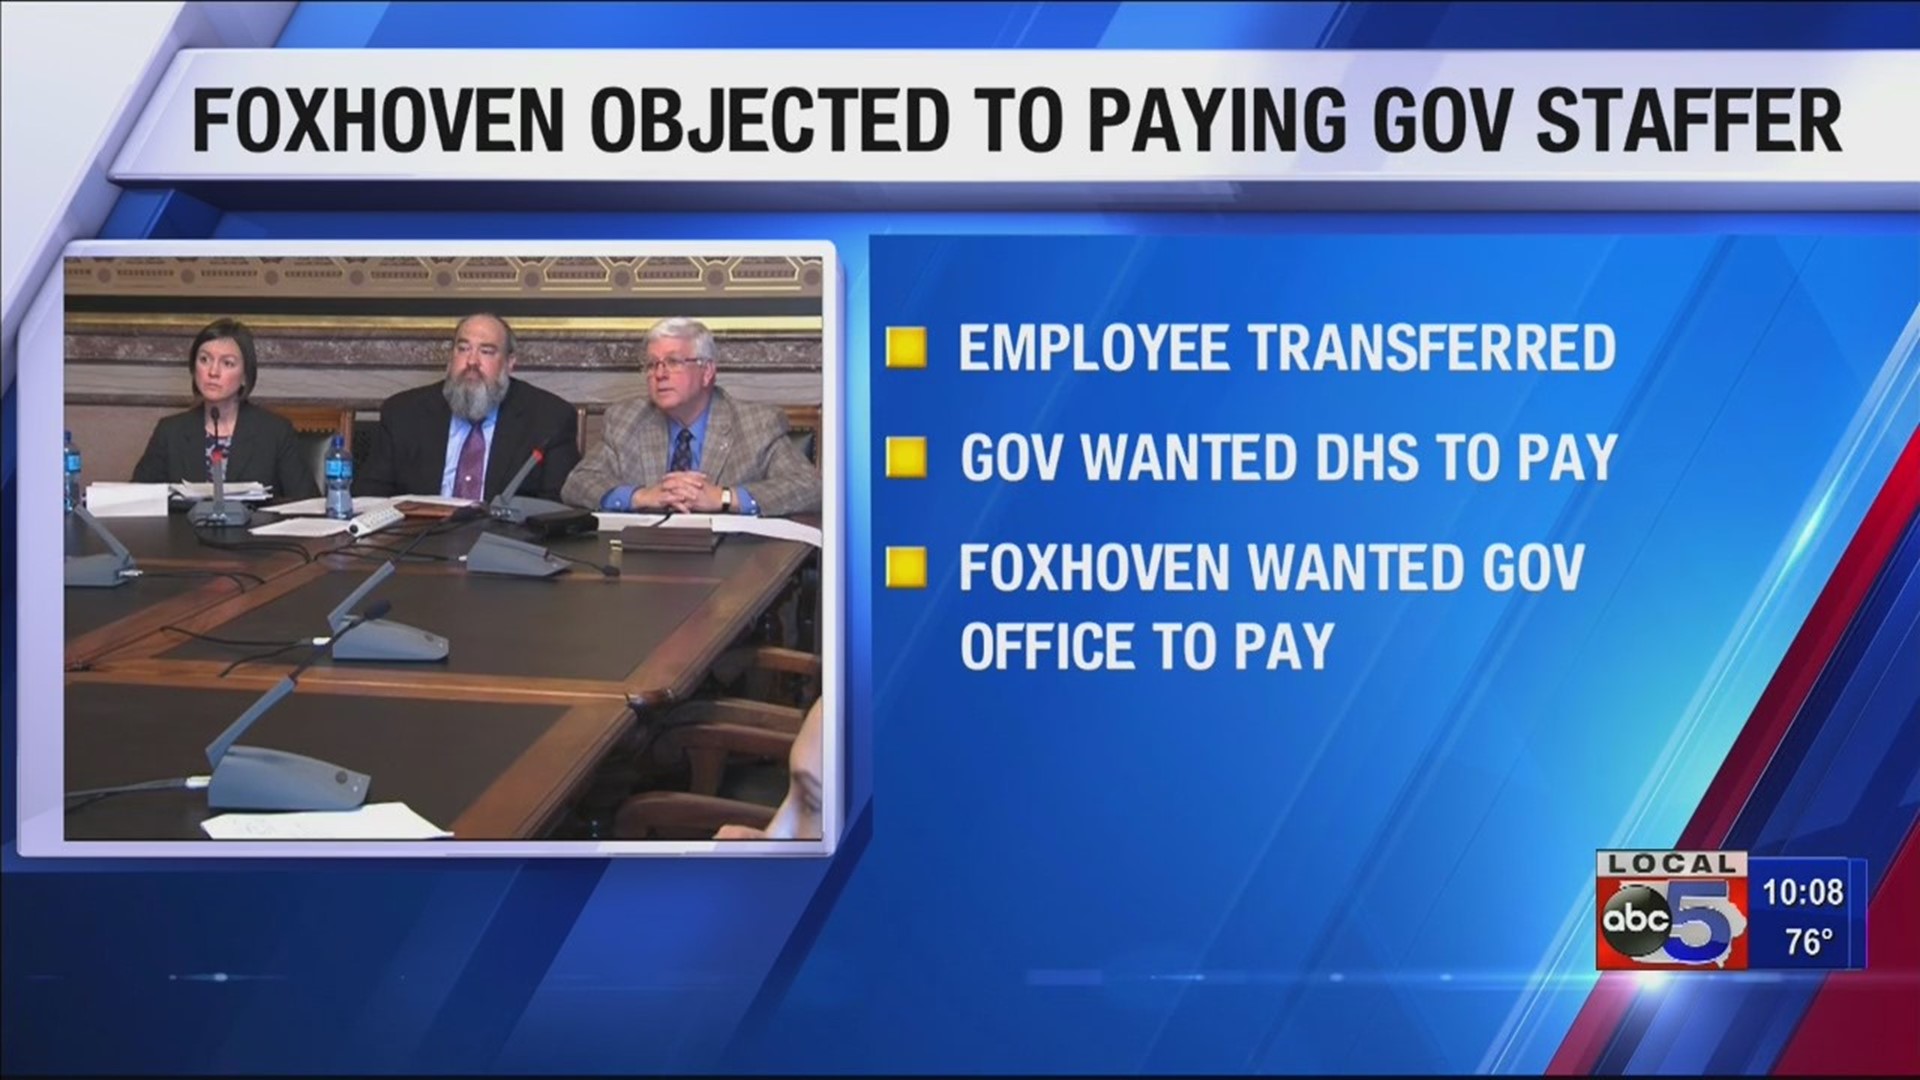 New details on foxhoven's resignation